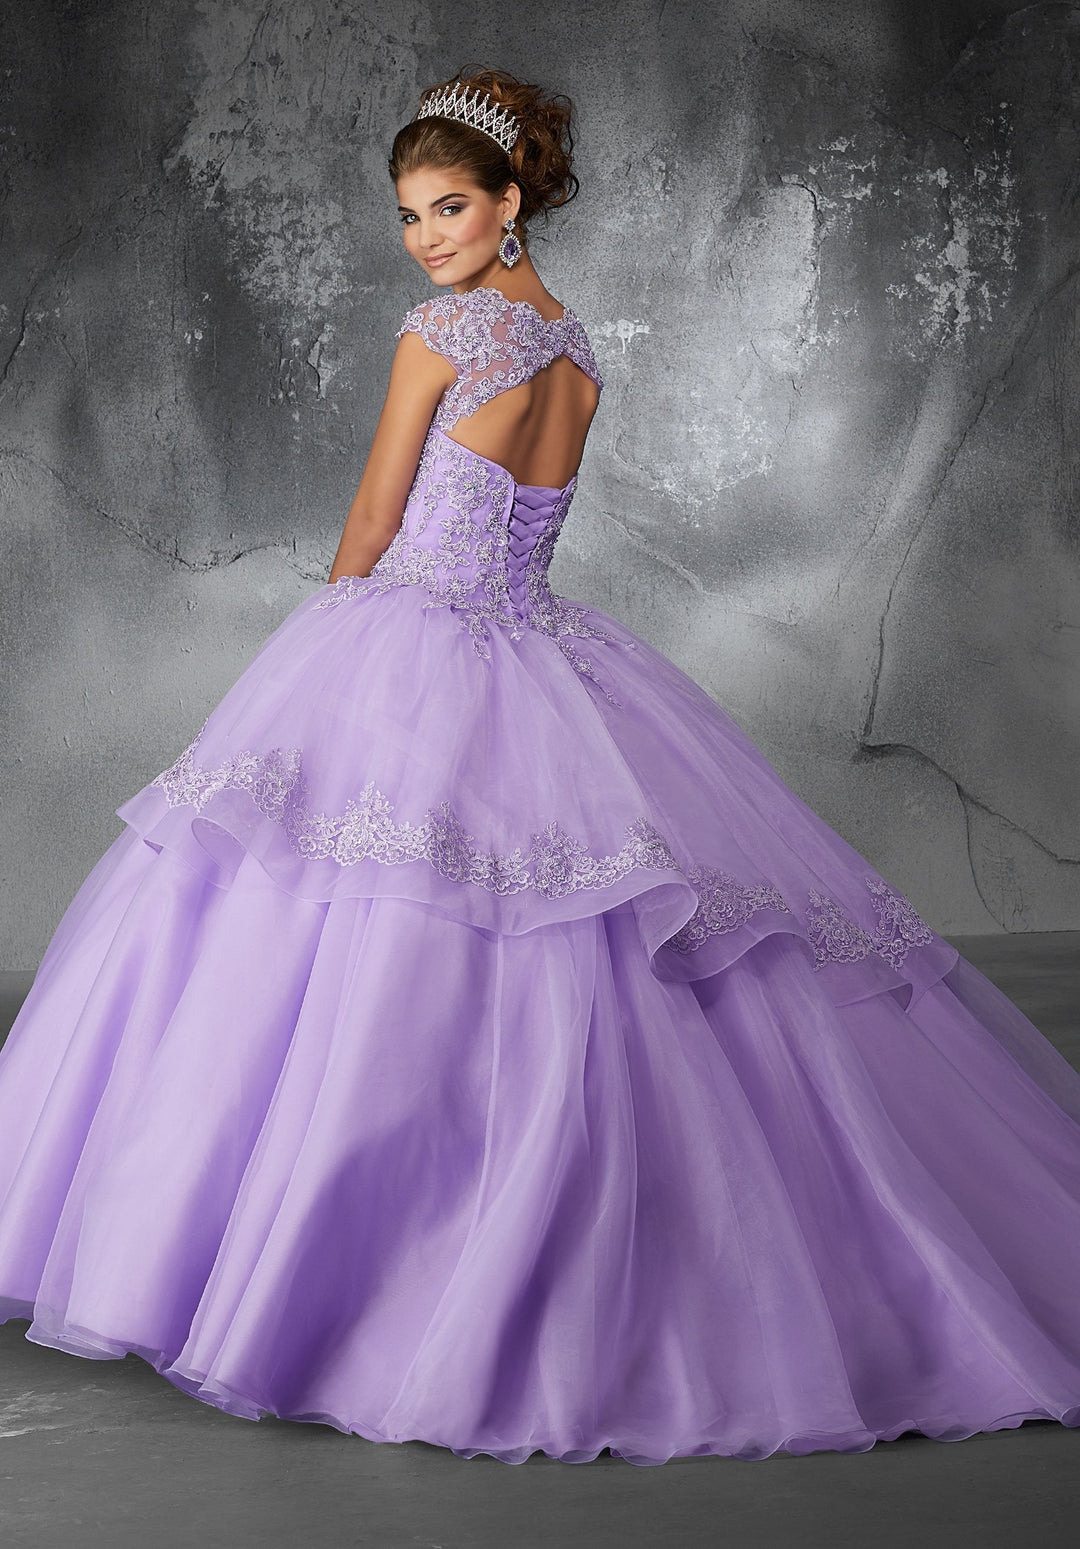 Vickie on a Lace Trimmed Skirt Flounce - MoriLee #60055